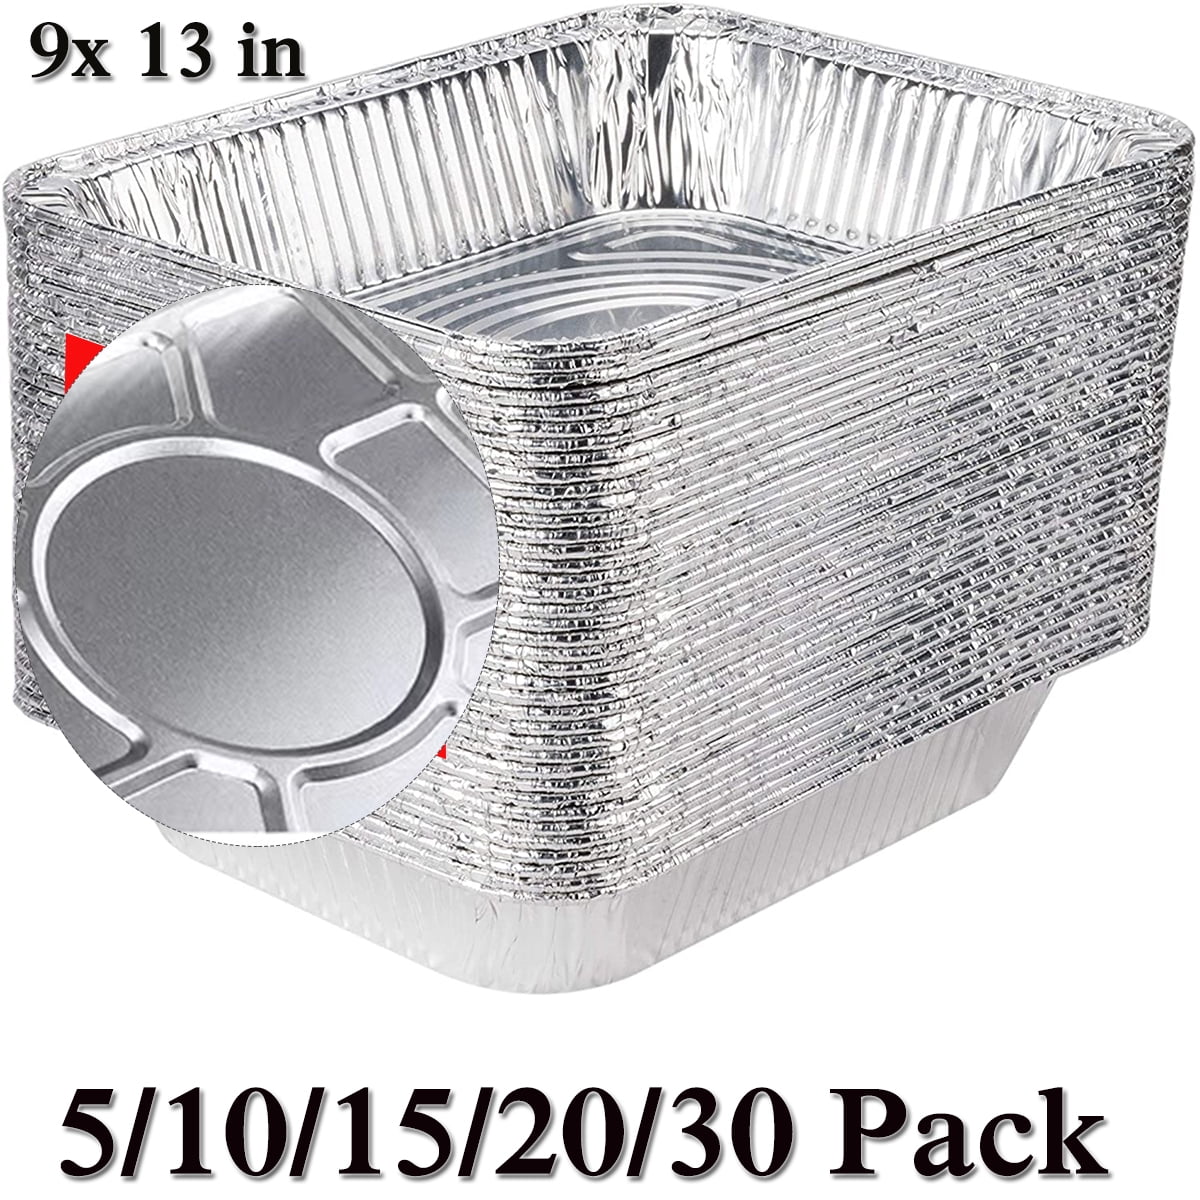 Juvale 20 Pack Aluminum Foil Pans with Lids 9x13, Disposable Half Size Deep Steam Table Pans Bakeware for Food, Baking, Roasting